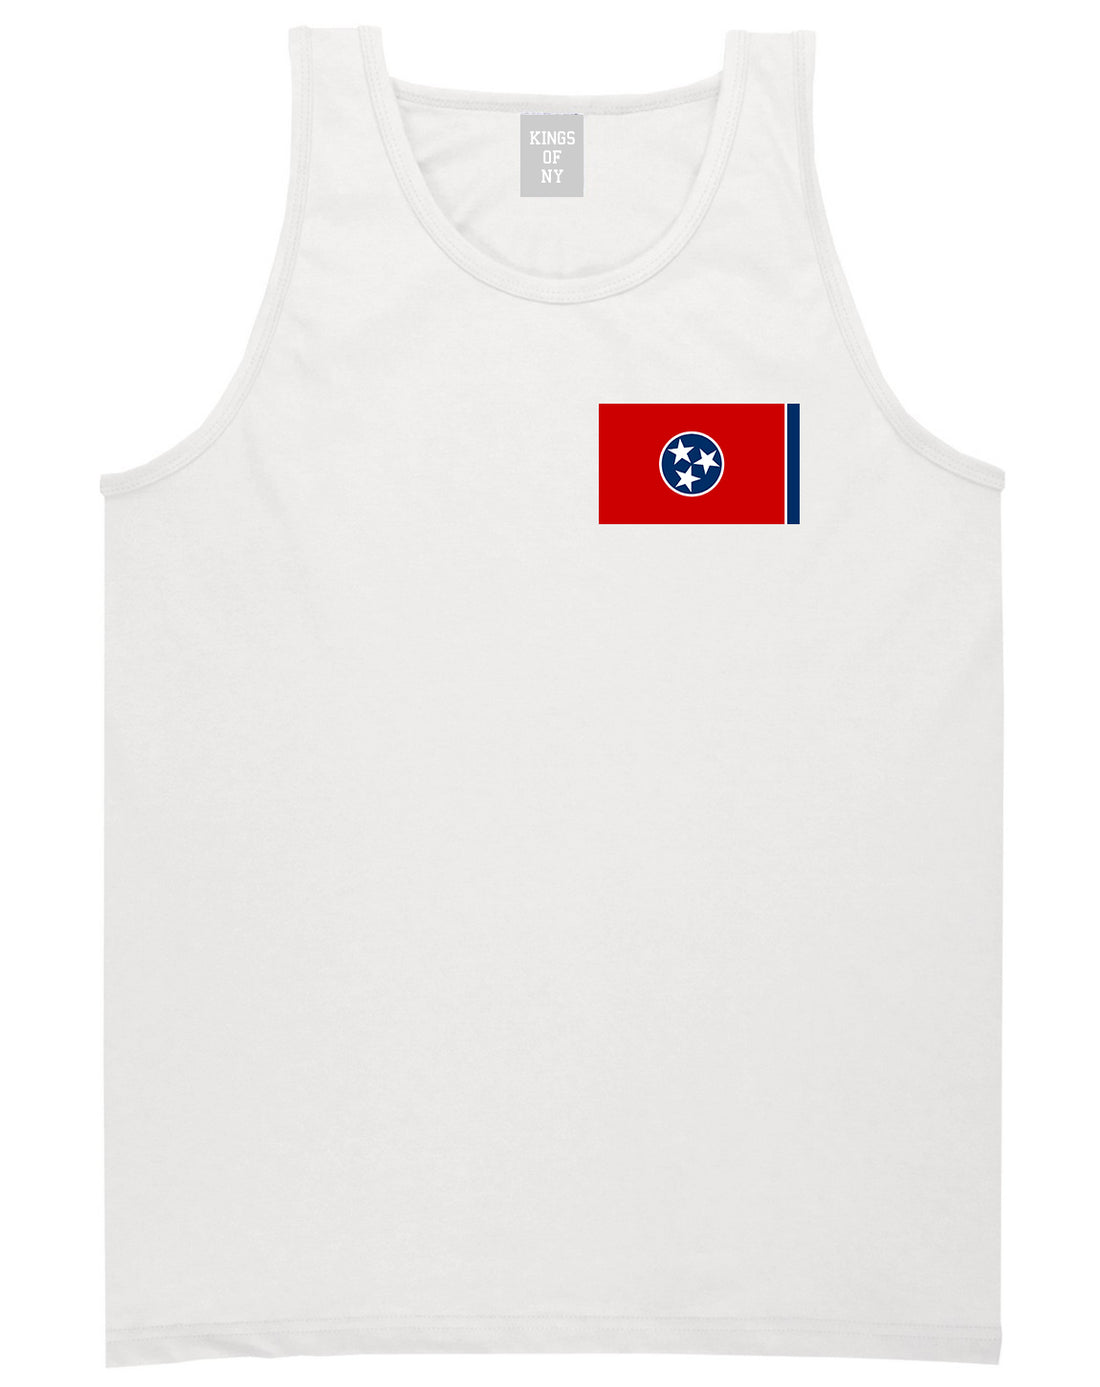 Tennessee State Flag TN Chest Mens Tank Top T-Shirt White